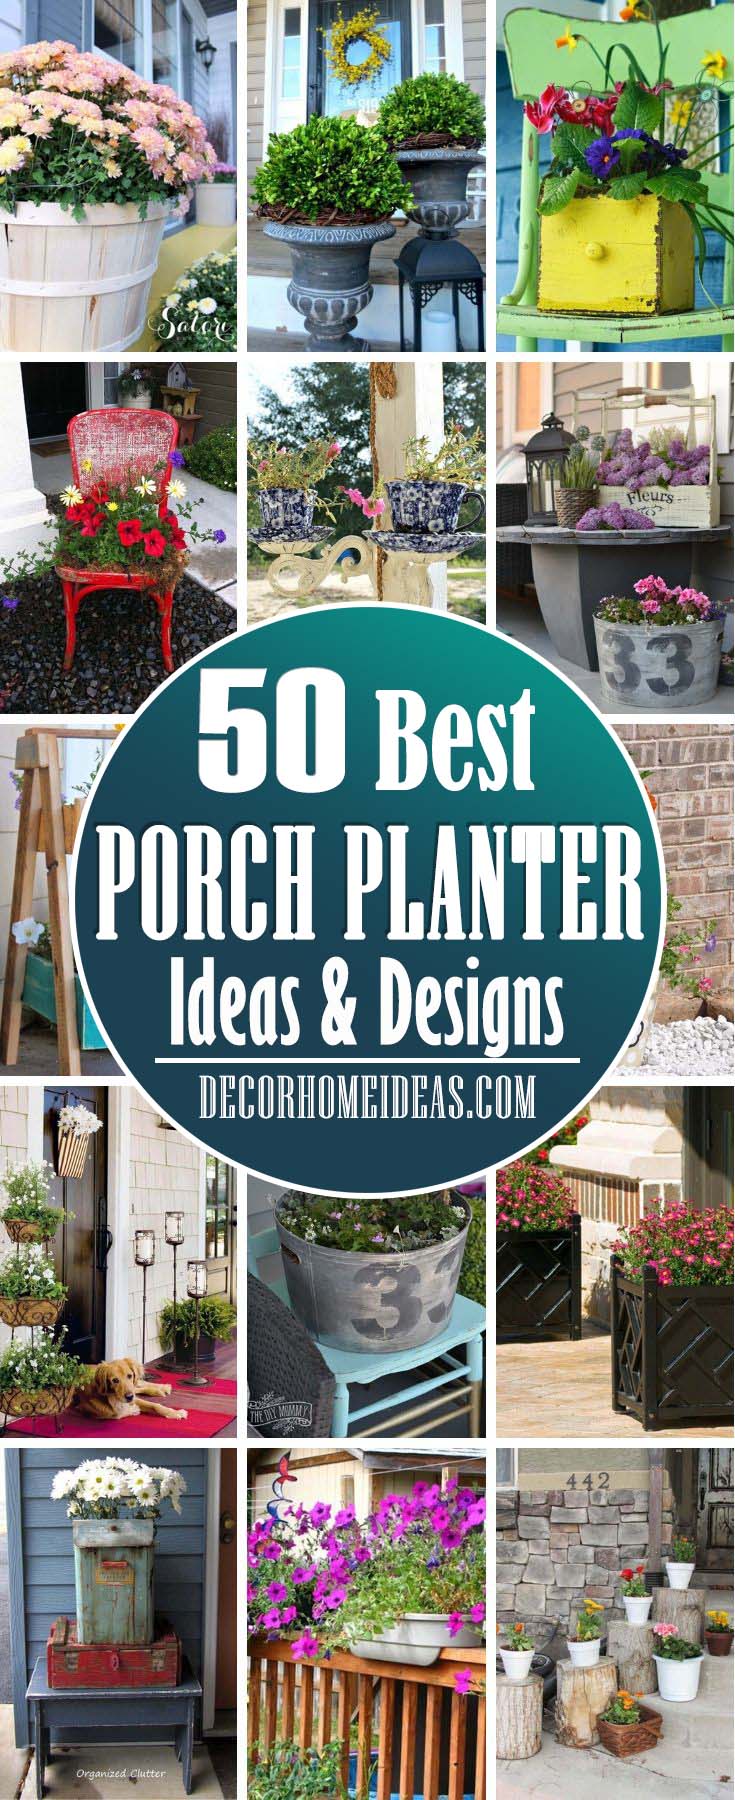 21 Charming Porch Planter Ideas To Boost Your Curb Appeal   Decor ...